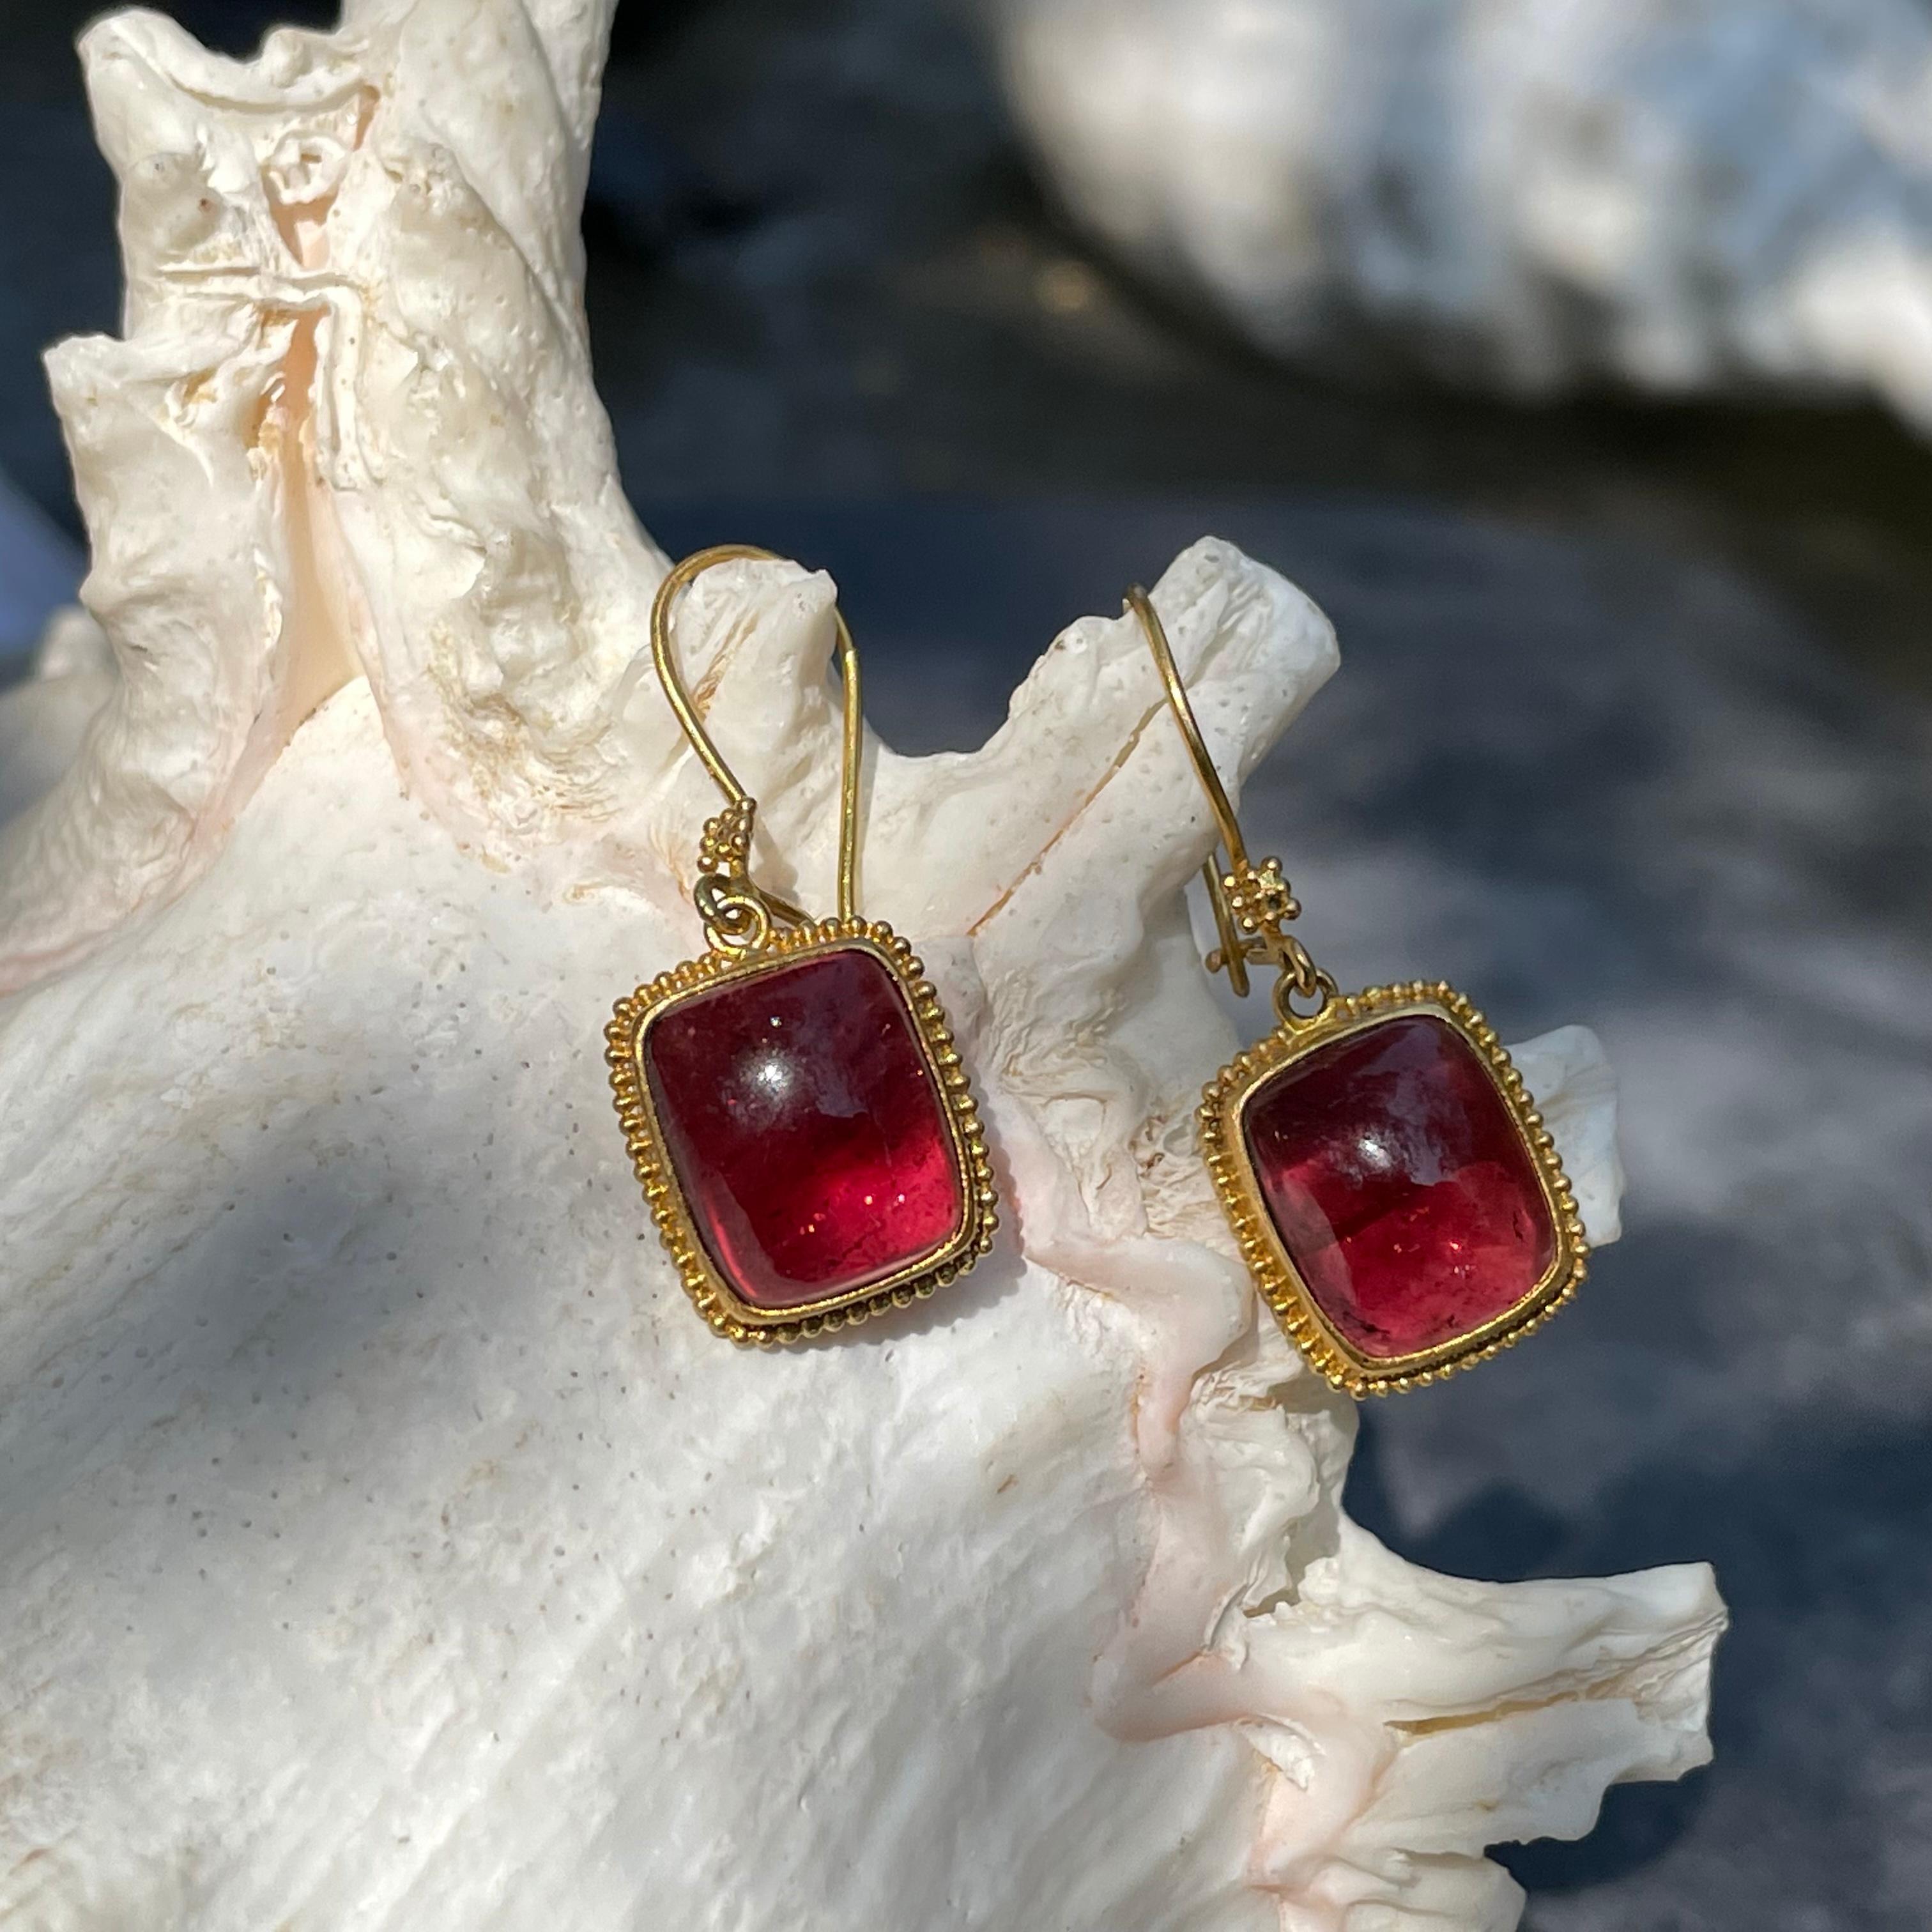 Two matching 10 x12 mm cushion cabochons of Mozambique pink tourmaline are accented by delicate hand applied granulation and suspended below tiny granulated squares in this Steven Battelle high carat gold design. 18K Safety clasp wire closures for